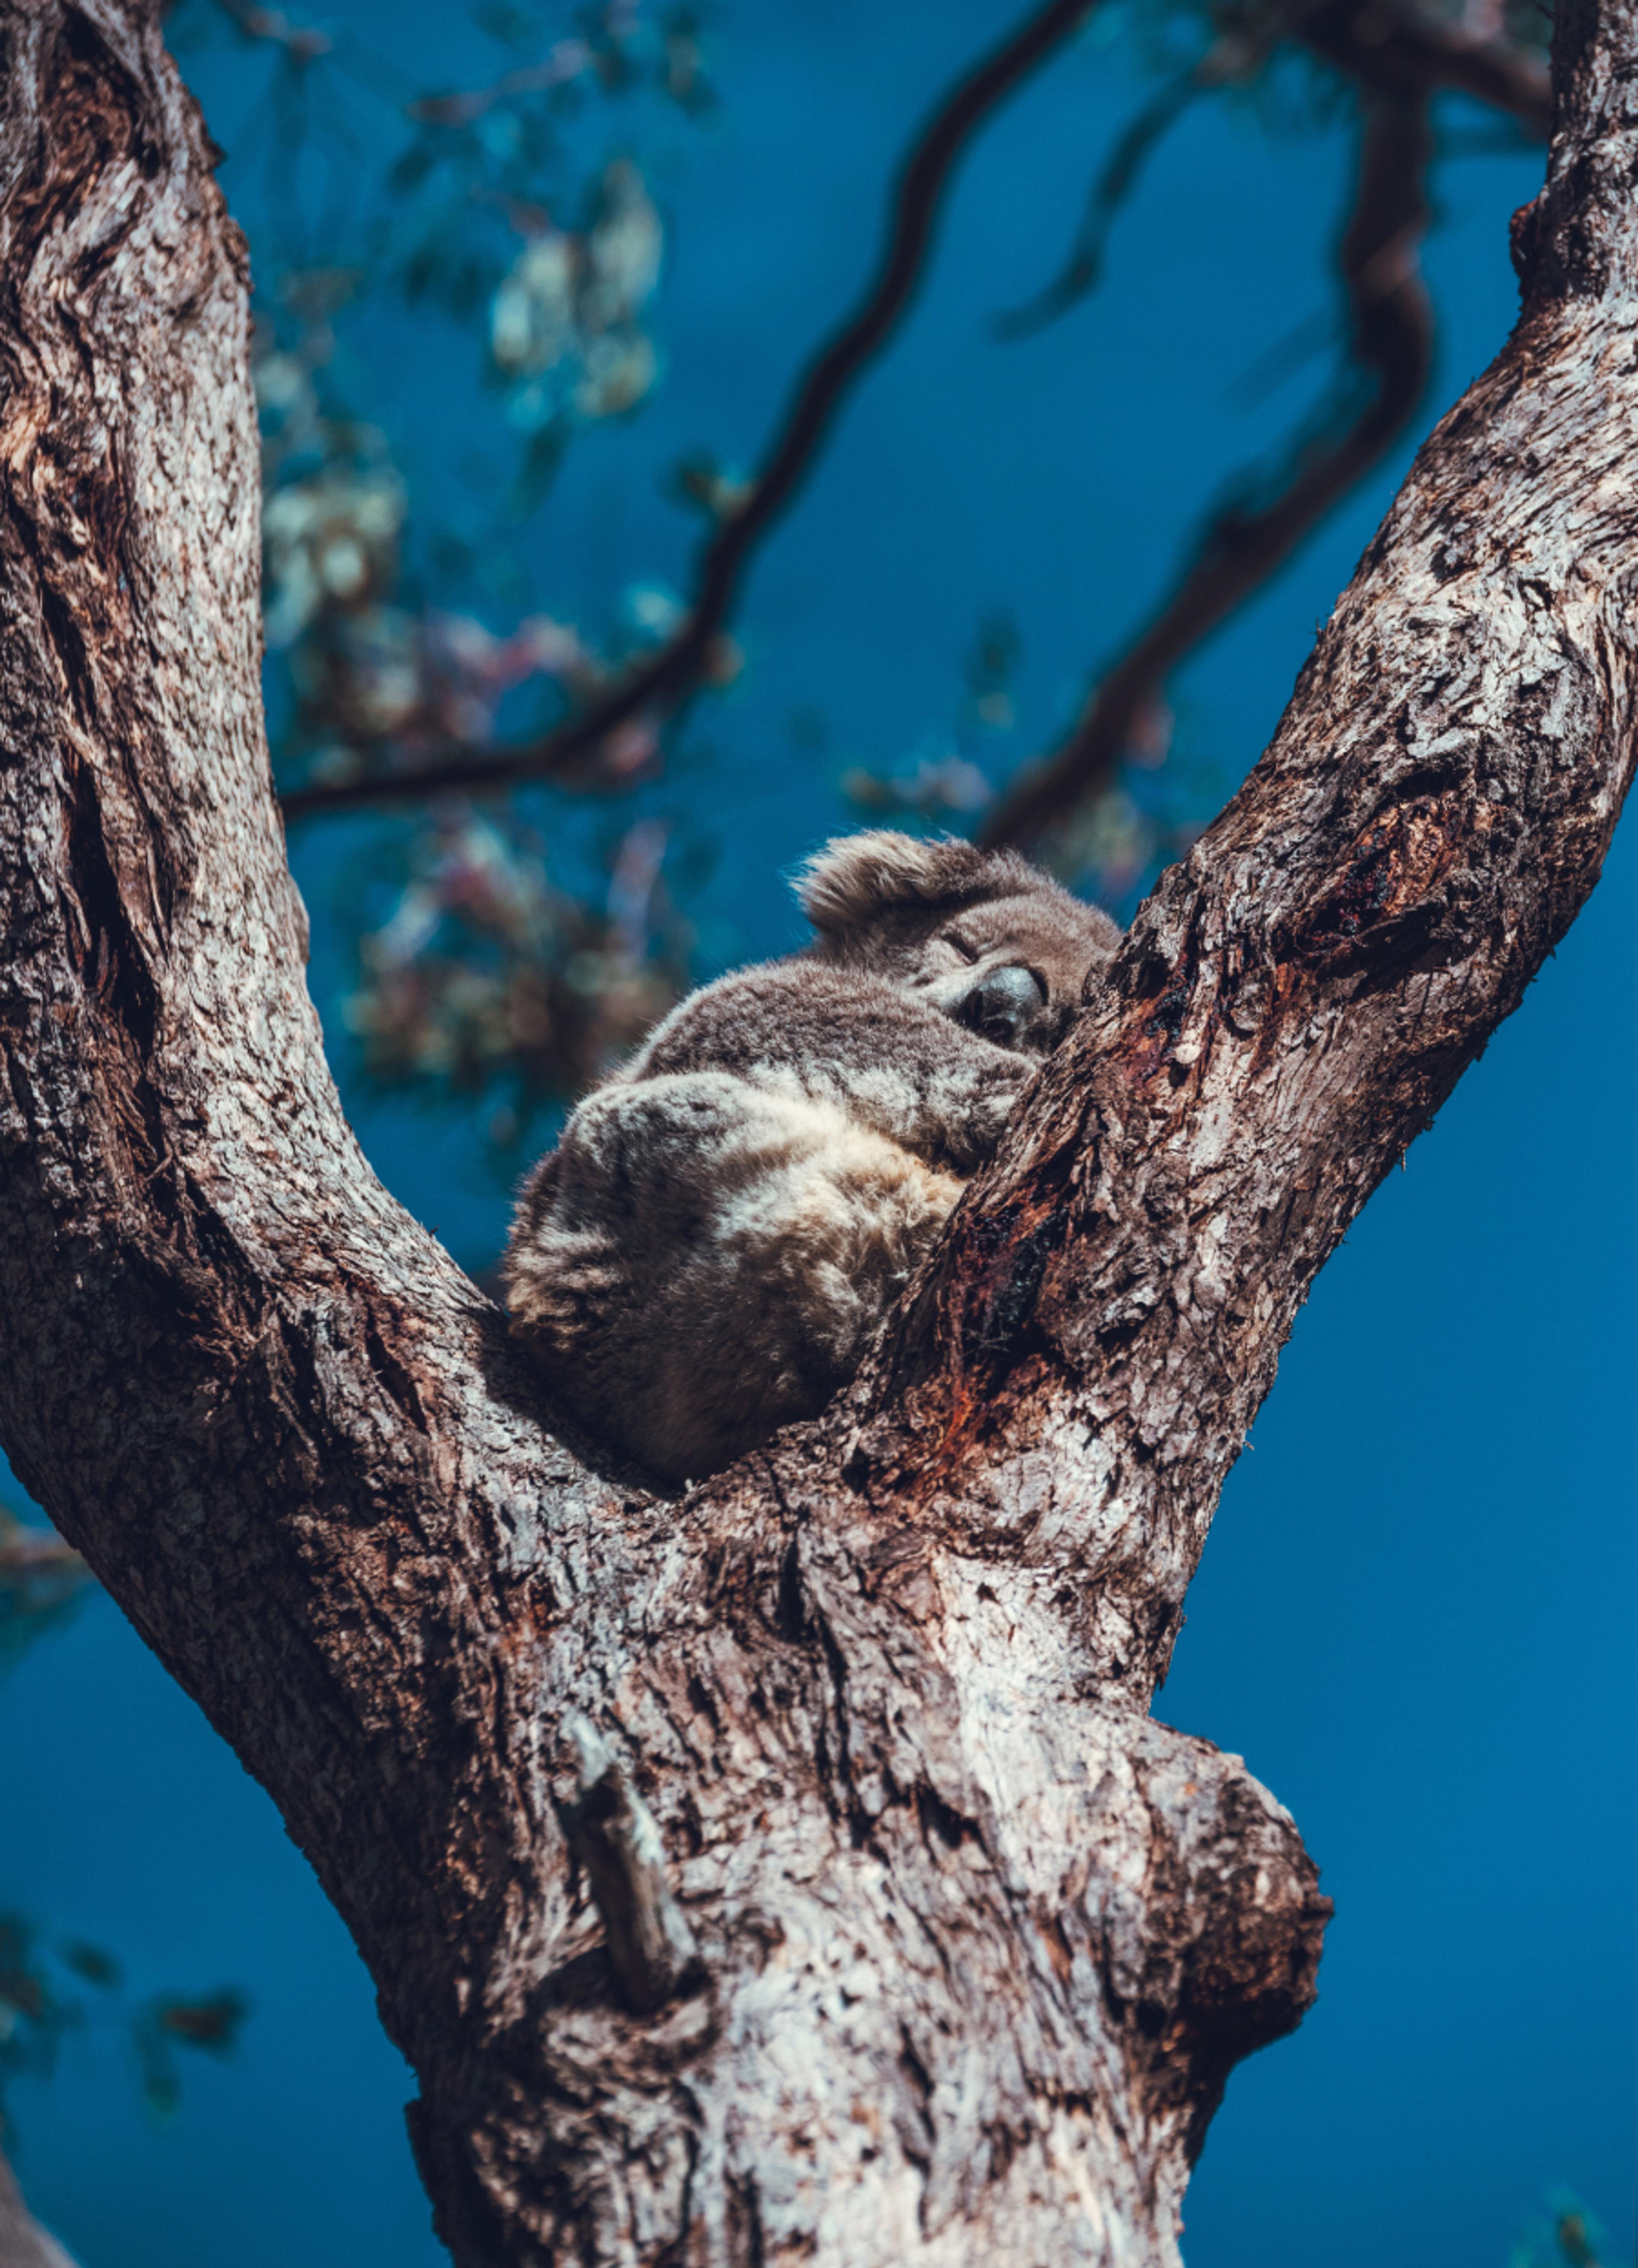 A koala nestled in a tree with a backdrop of blue skies.